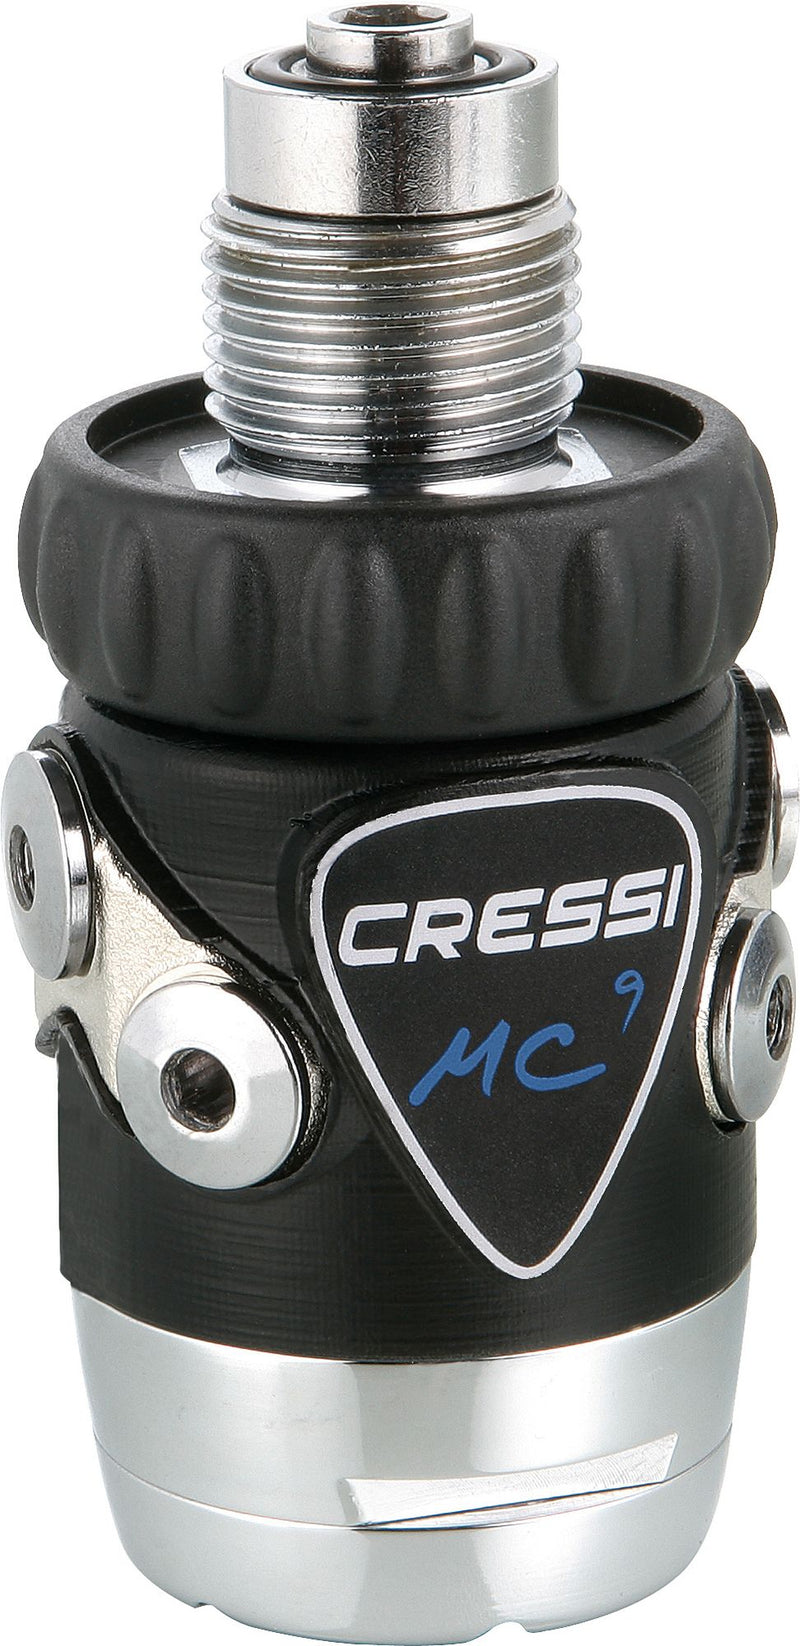 Cressi Mc9-Sc 1St Stage Only erogatore 1 ° stadio immersion subacque erogator scuba diving regulator 1st stage only